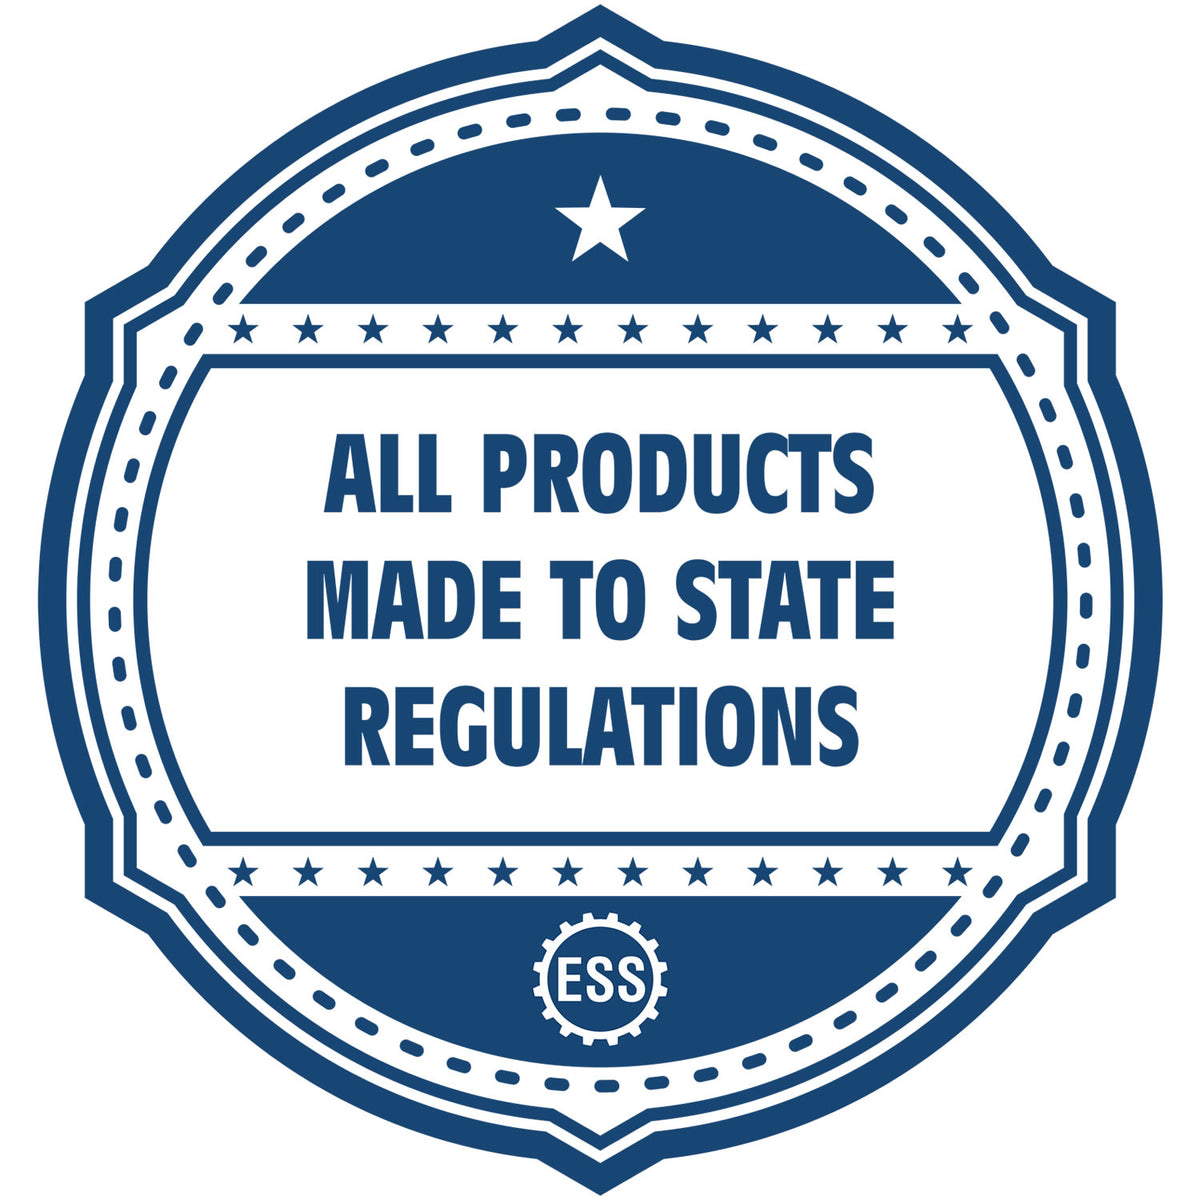 An icon or badge element for the Alabama Desk Surveyor Seal Embosser showing that this product is made in compliance with state regulations.